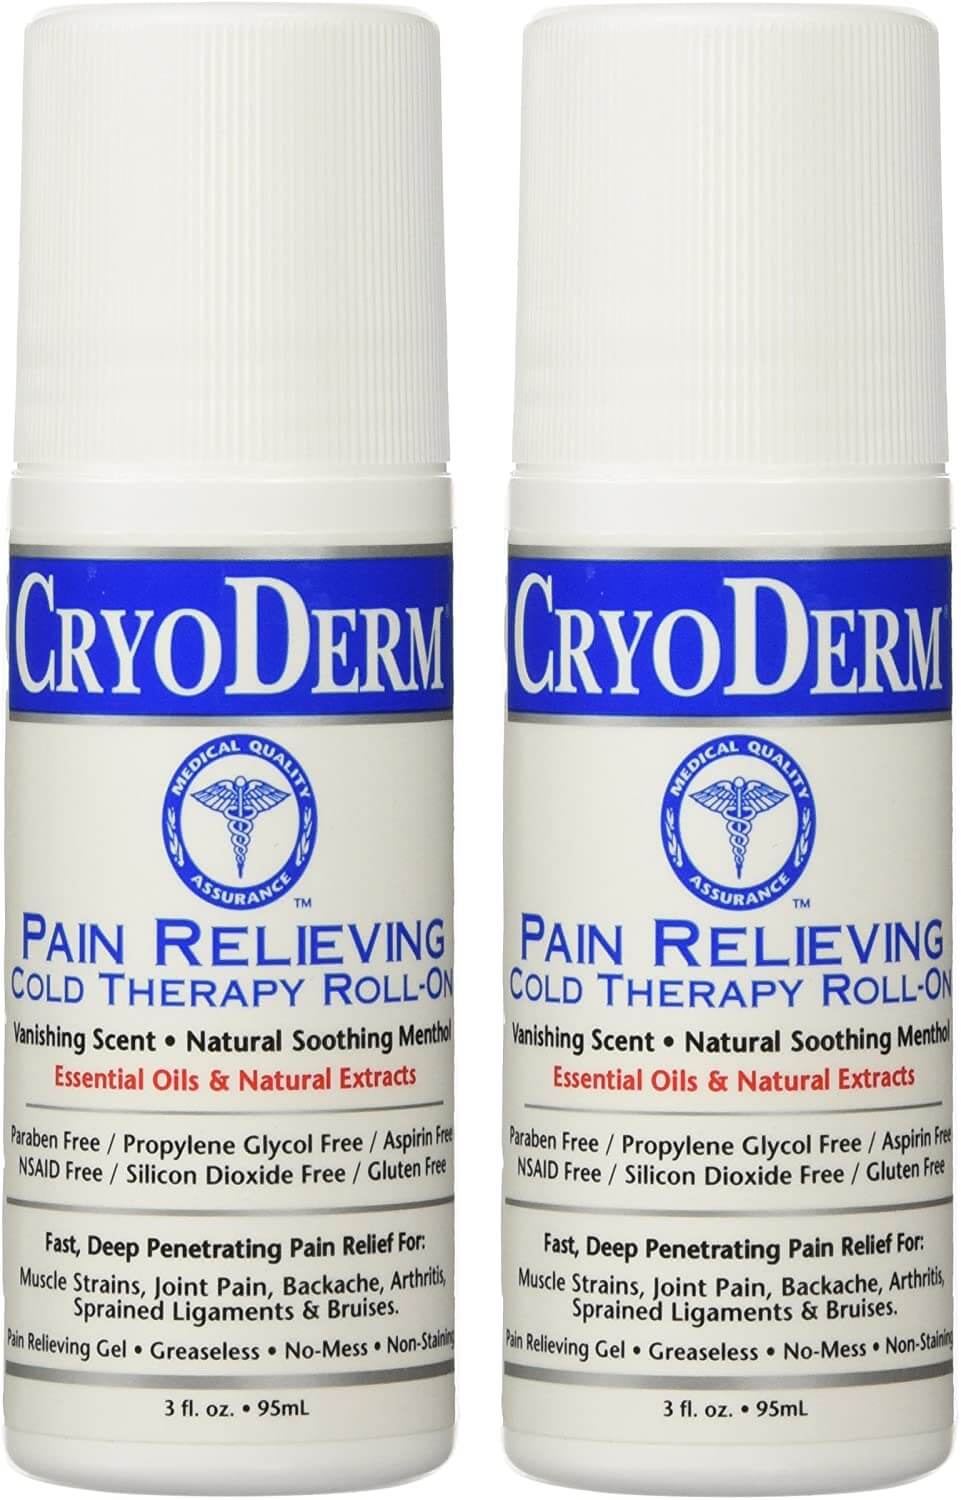 Cryoderm Pain Relieving Roll-on Review